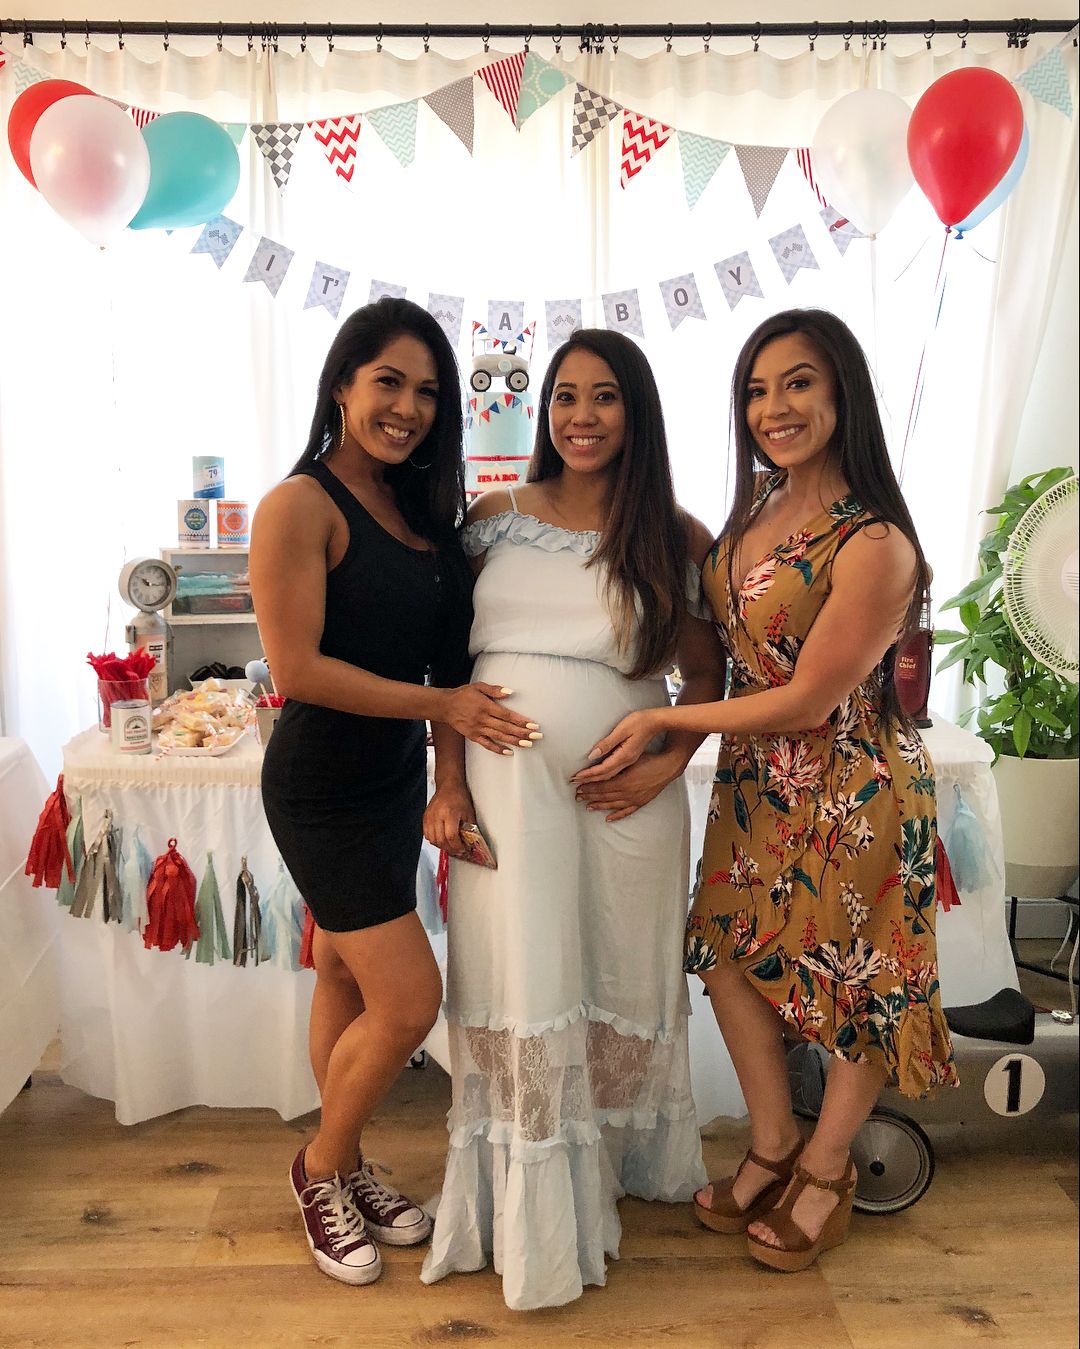 Full Size of Baby Shower:maternity Boutique Cute Maternity Dresses For Baby Shower Affordable Maternity Dresses For Baby Shower What To Wear To My Baby Shower Long Maternity Dresses Maternity Dresses For Baby Shower Celebrity Baby Shower Dresses Maternity Blouses For Baby Shower